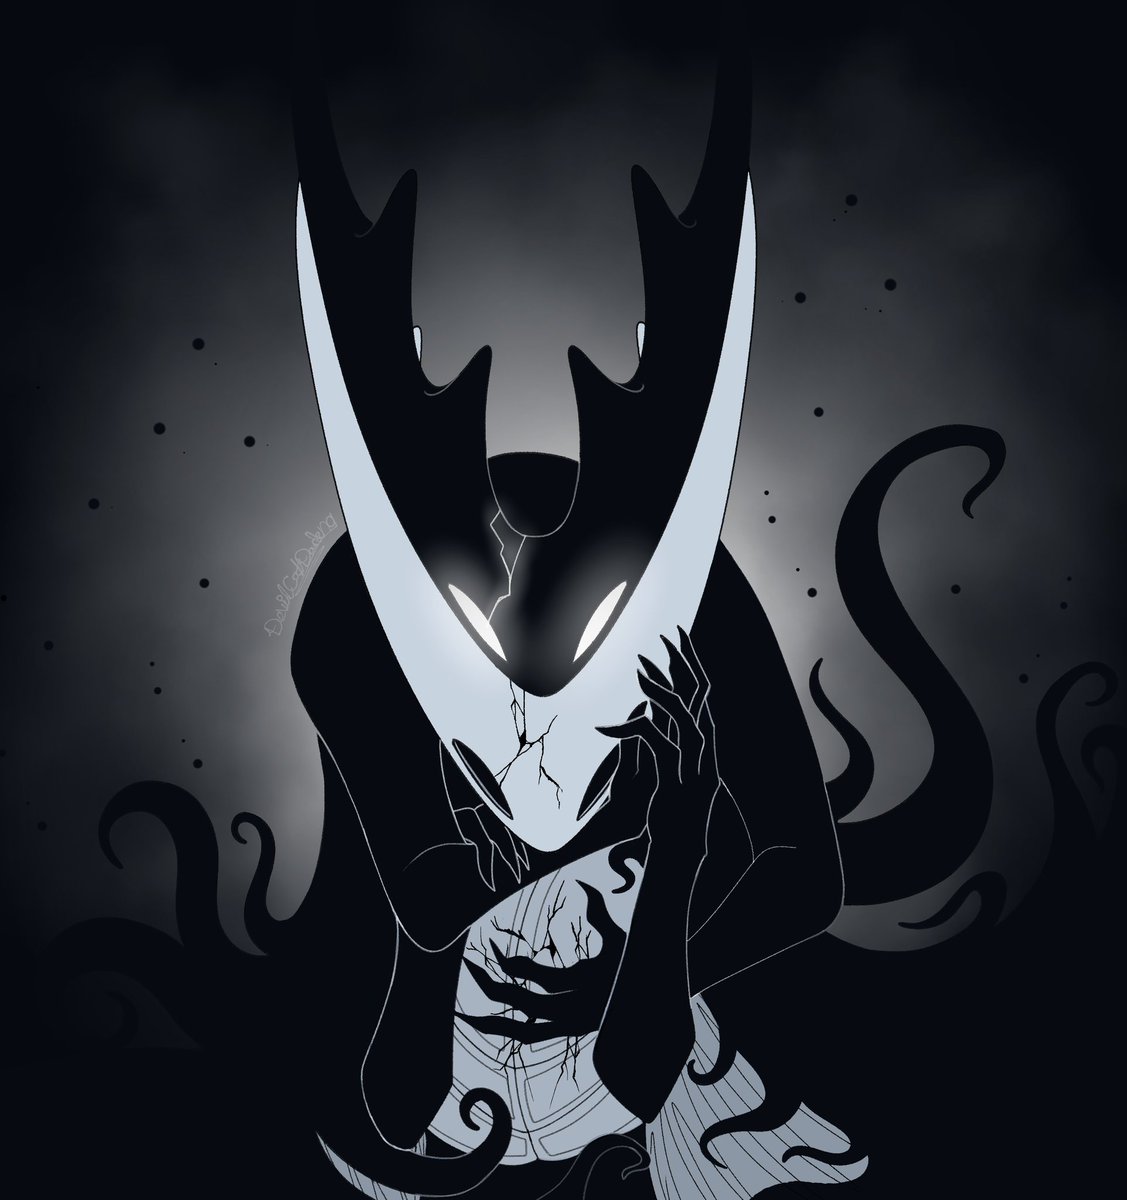 If there was no one else who would make the vessel atone for its sins, then it would do so itself ~
Little doodle for a time travel fix-it centered around THK's shade returning to the past to haunt its former self
#hollowknight #hollowknightfanart #hollowknightart